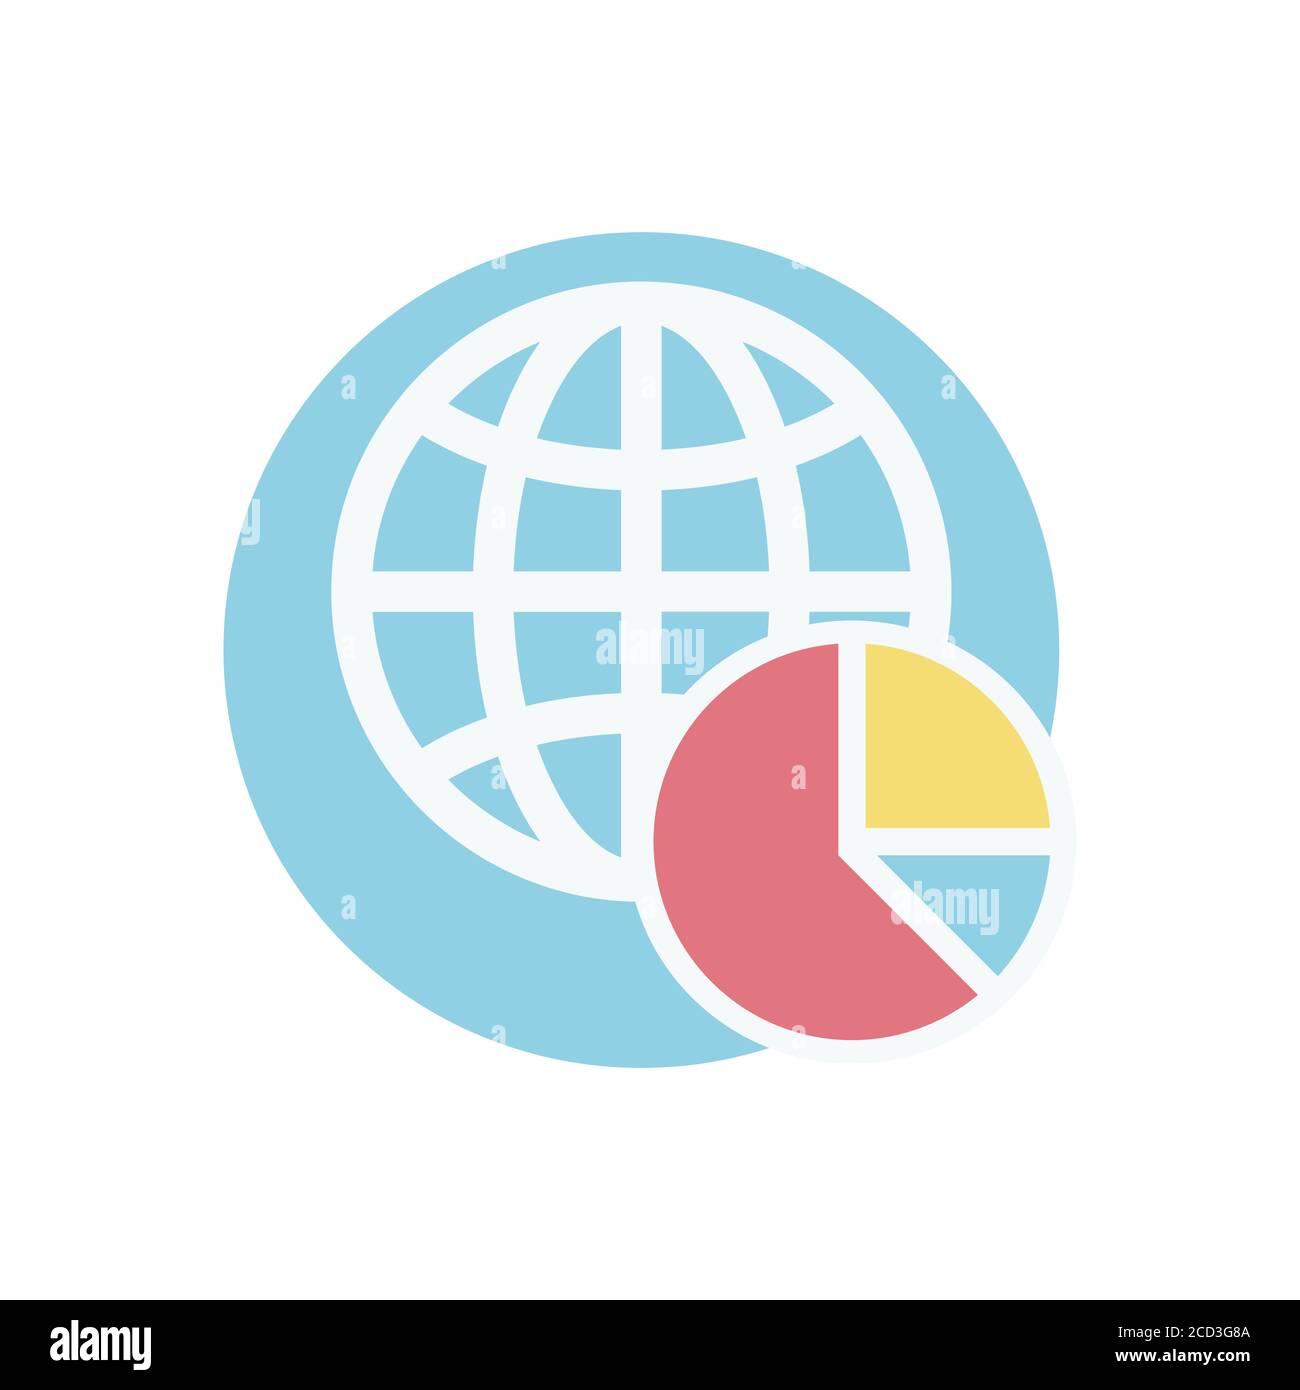 Geography and social science icon. Symbol with globe and pie chart. Stock Vector